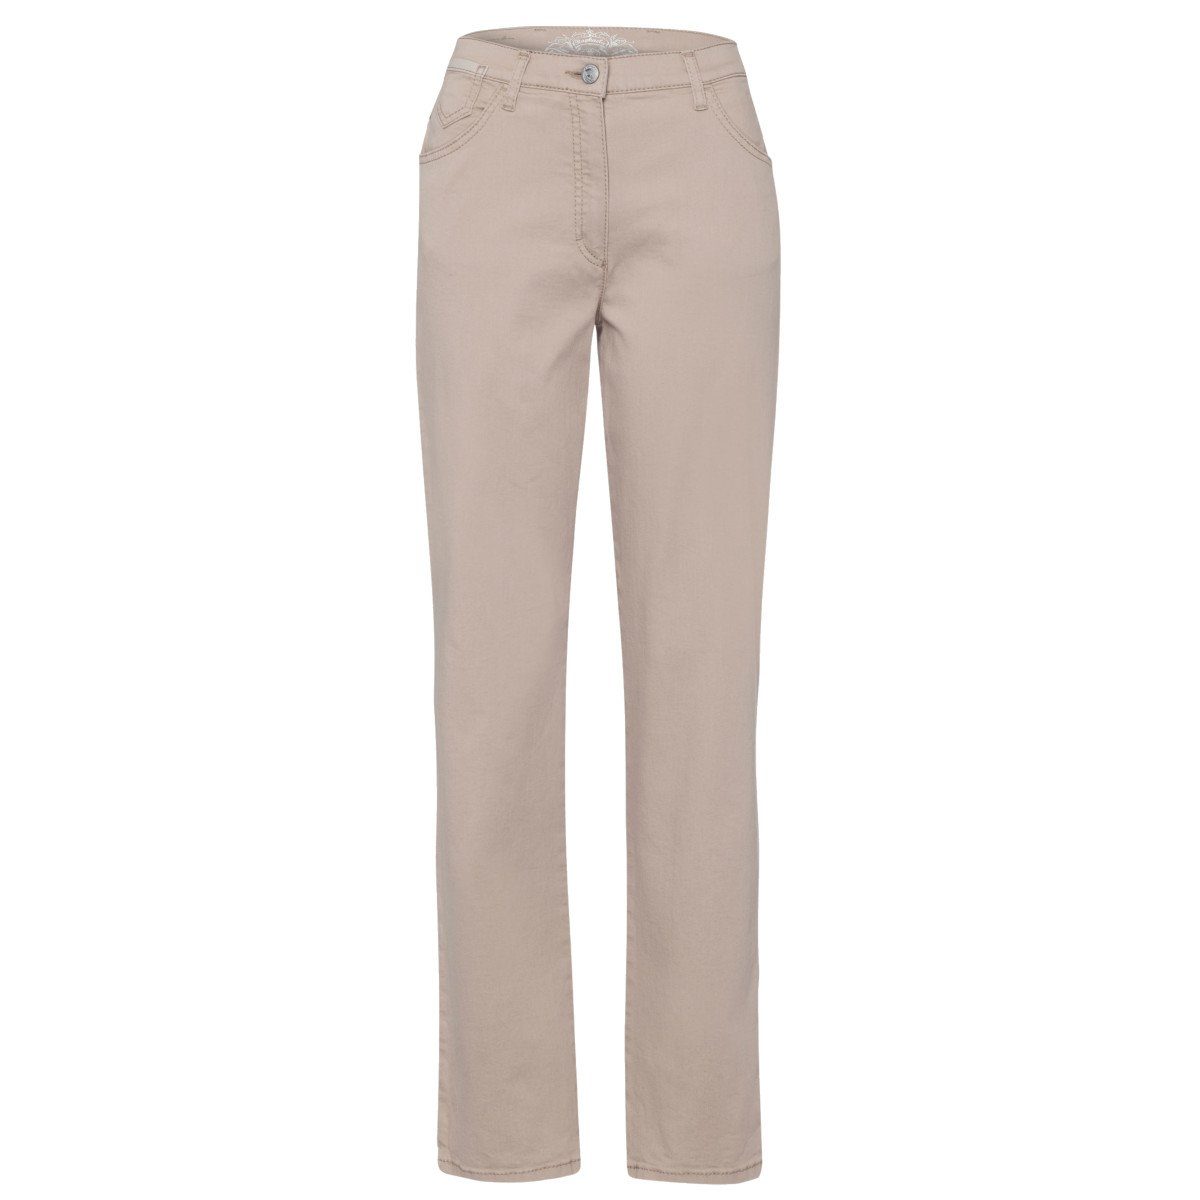 RAPHAELA by BRAX 5-Pocket-Jeans Corry Fay Comfort Plus COMFORT FIT light taupe (55)